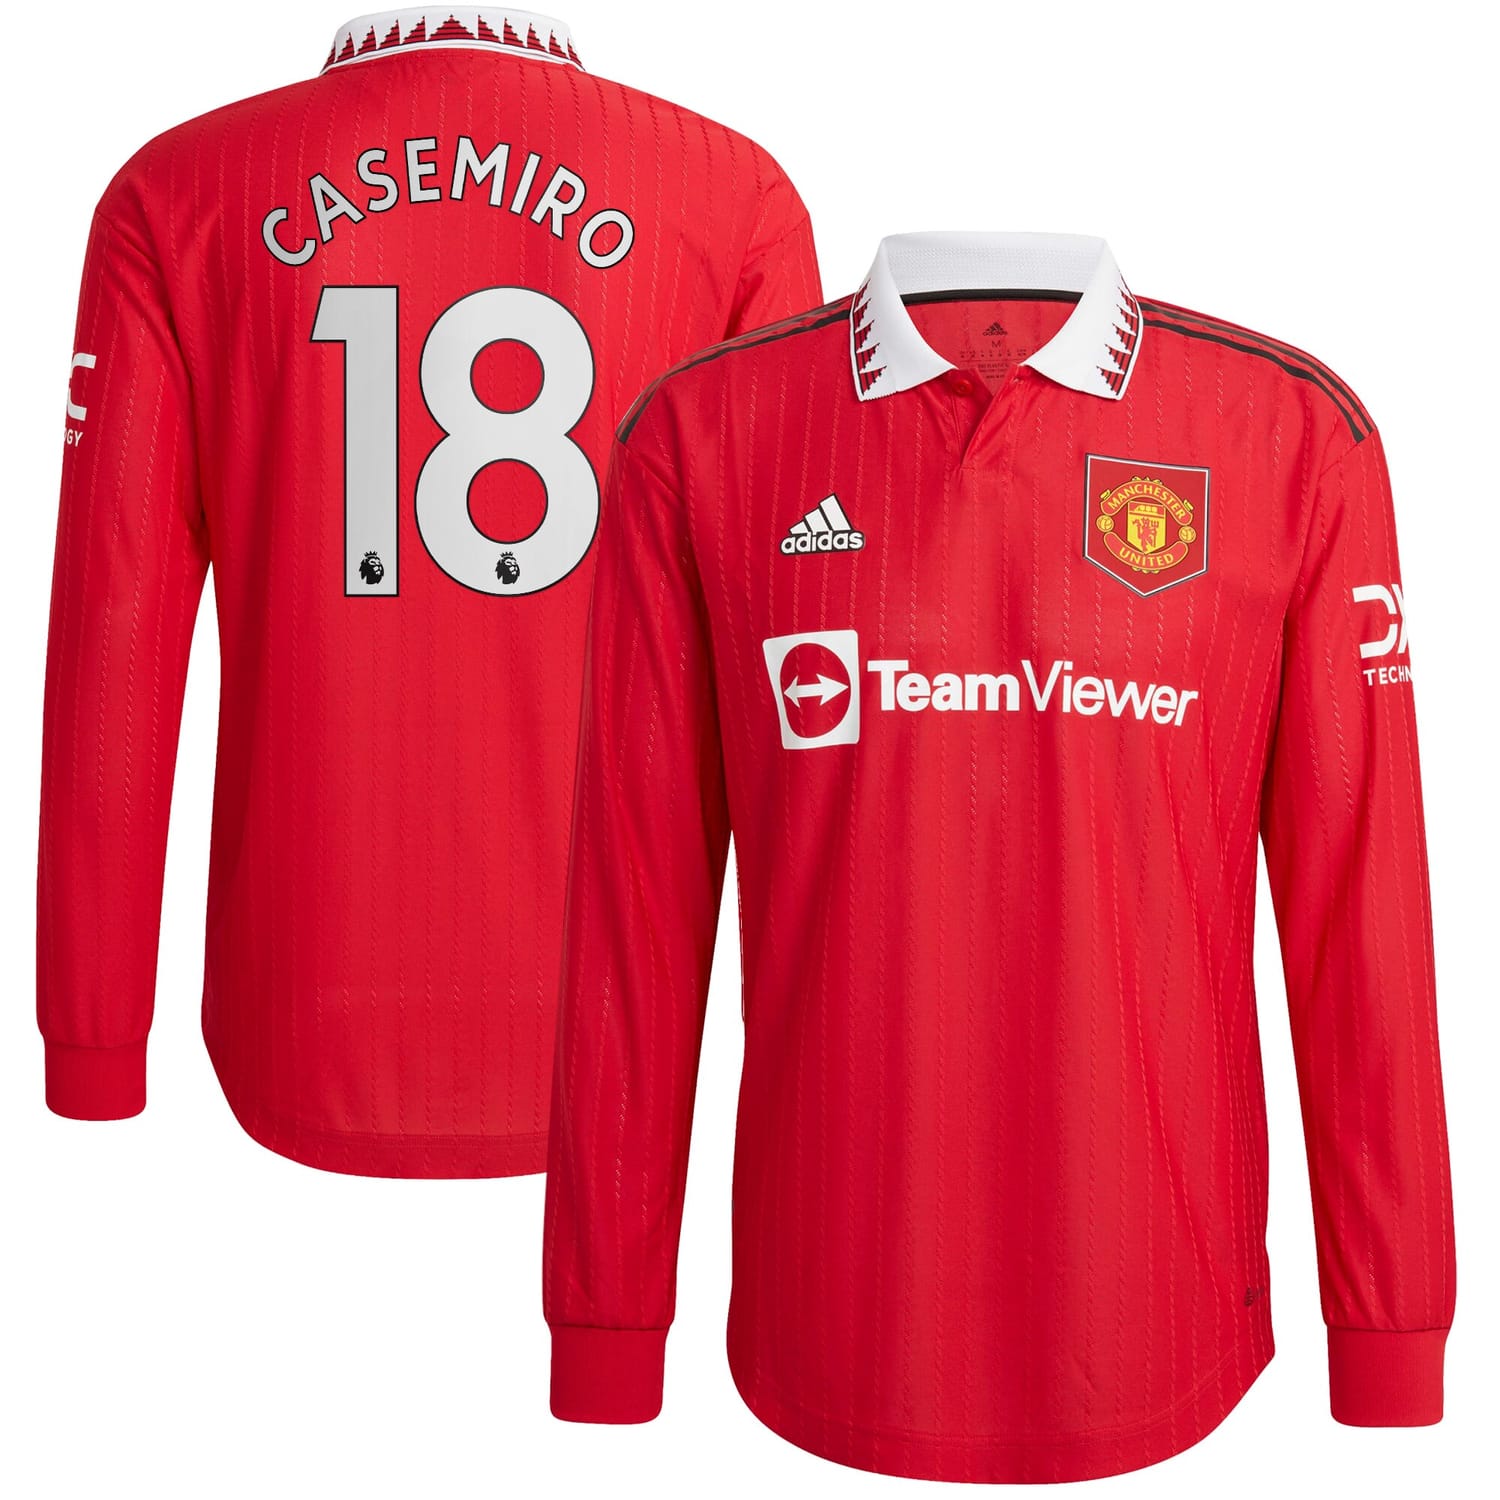 Premier League Manchester United Home Authentic Jersey Shirt Long Sleeve 2022-23 player Casemiro 18 printing for Men